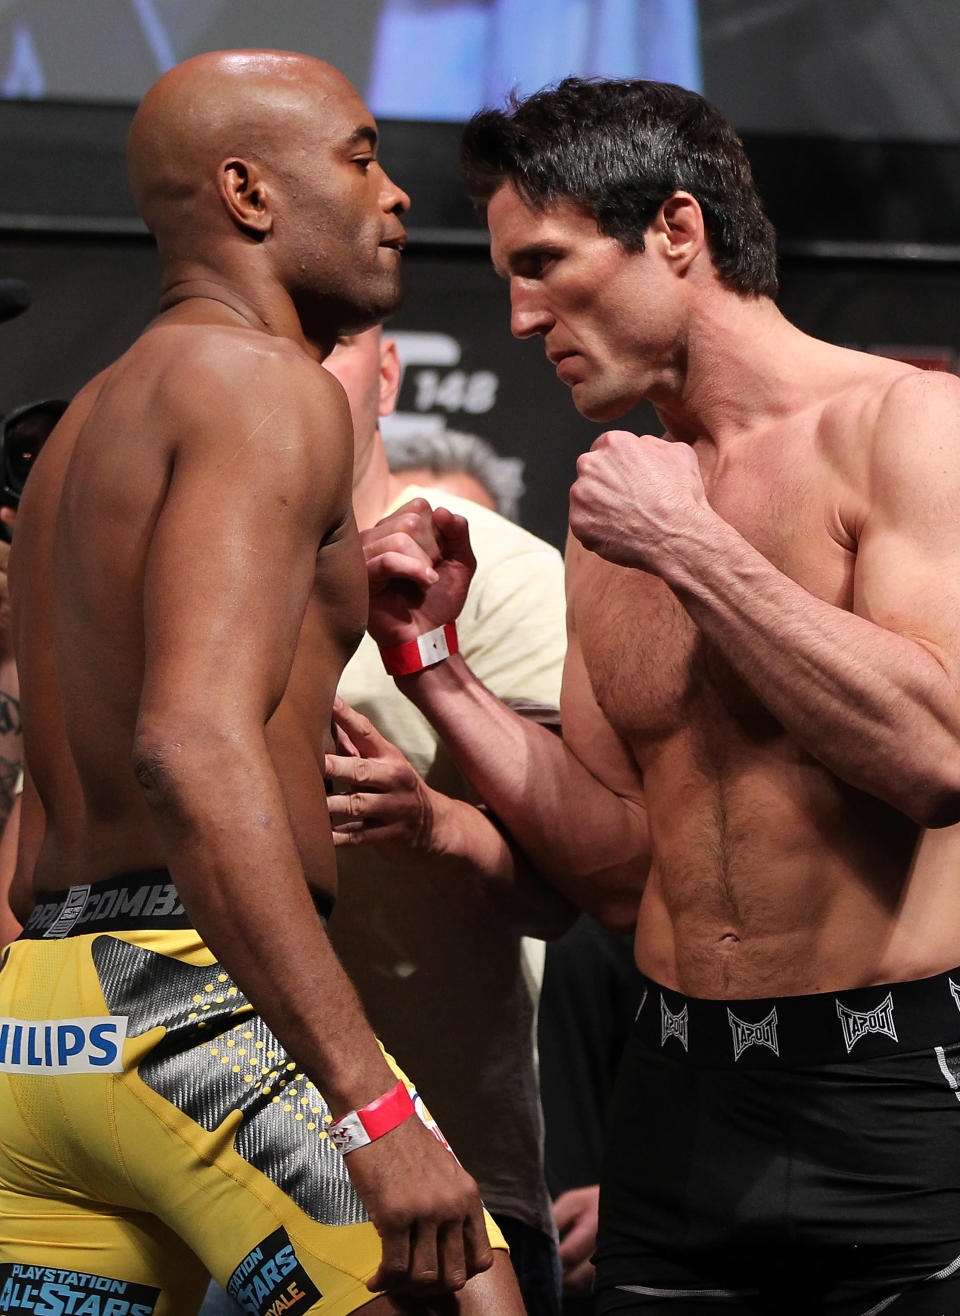 LAS VEGAS, NV - JULY 6: (L-R) Opponents Anderson Silva and Chael Sonnen face off during the UFC 148 Weigh In at the Mandalay Bay Events Center on July 6, 2012 in Las Vegas, Nevada. (Photo by Josh Hedges/Zuffa LLC/Zuffa LLC via Getty Images)